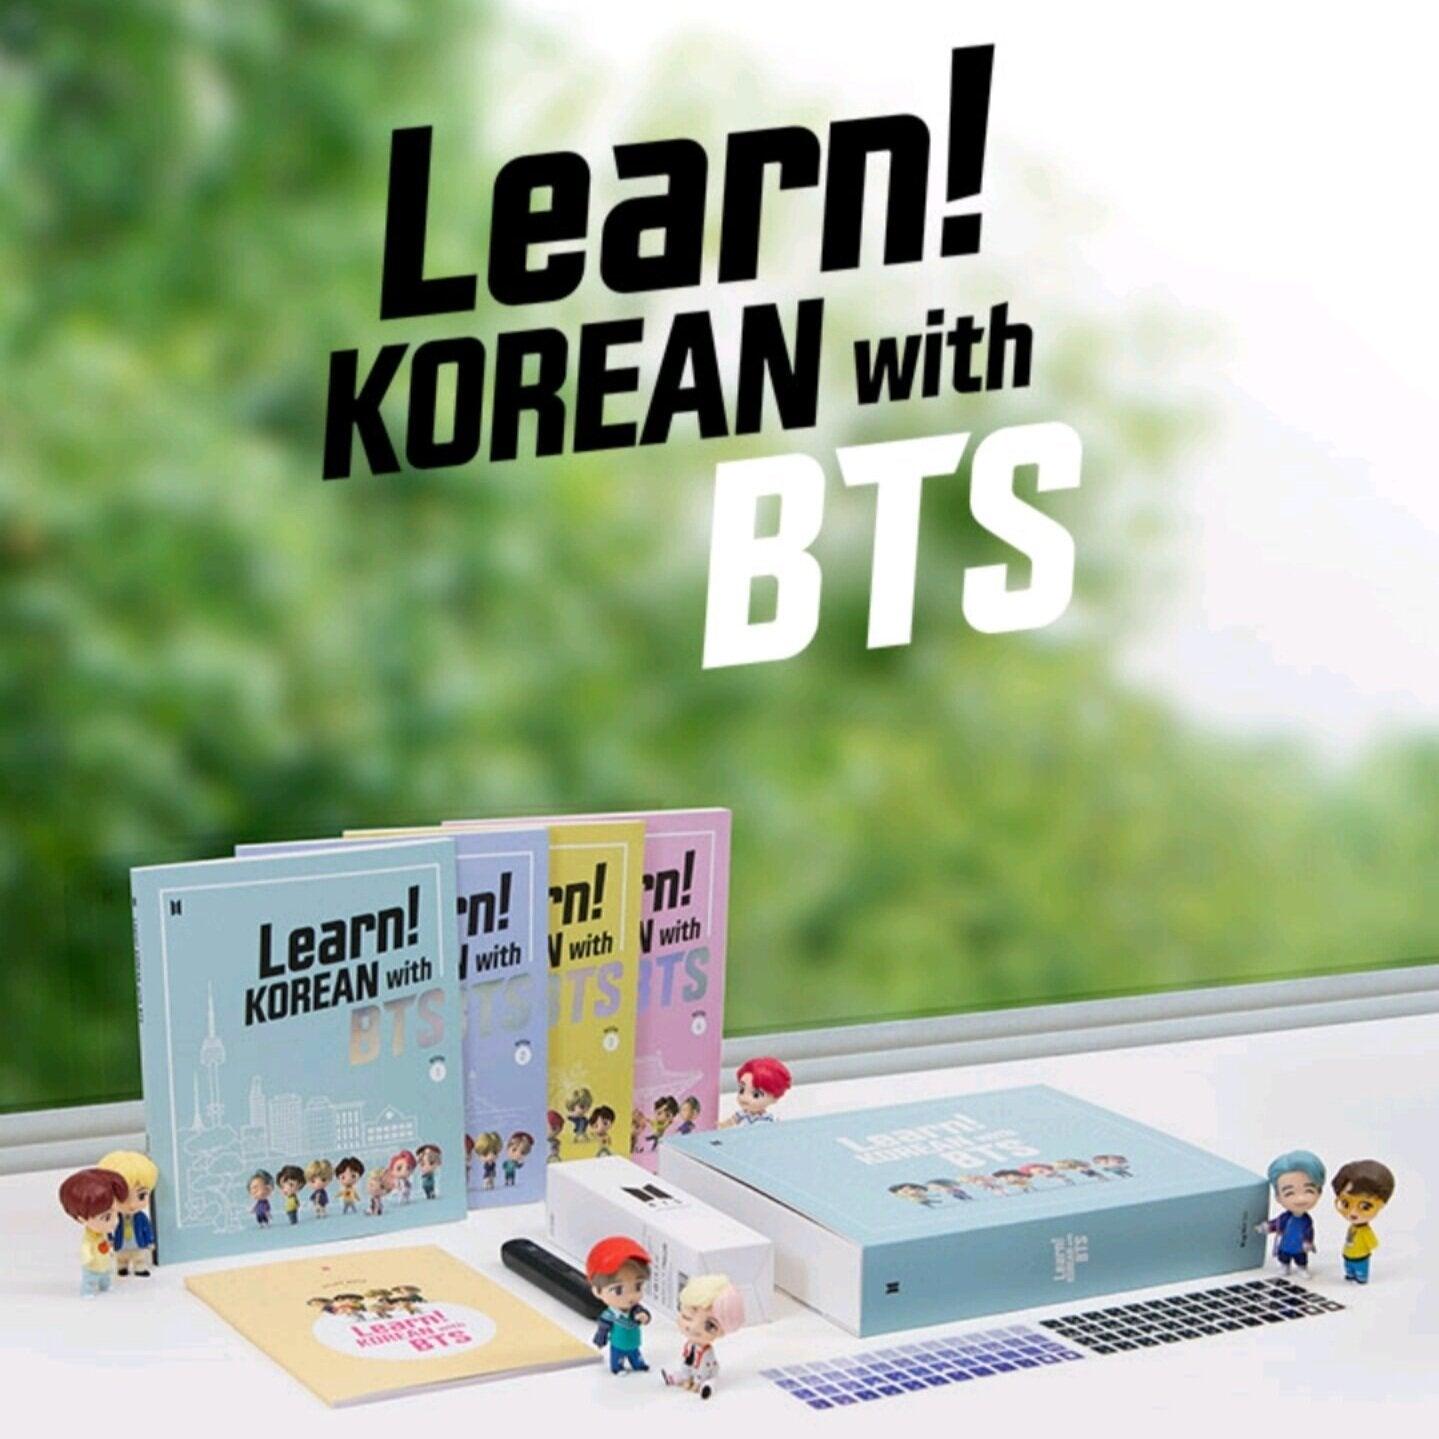 BTS 'LEARN! KOREAN WITH BTS' BOOK PACKAGE